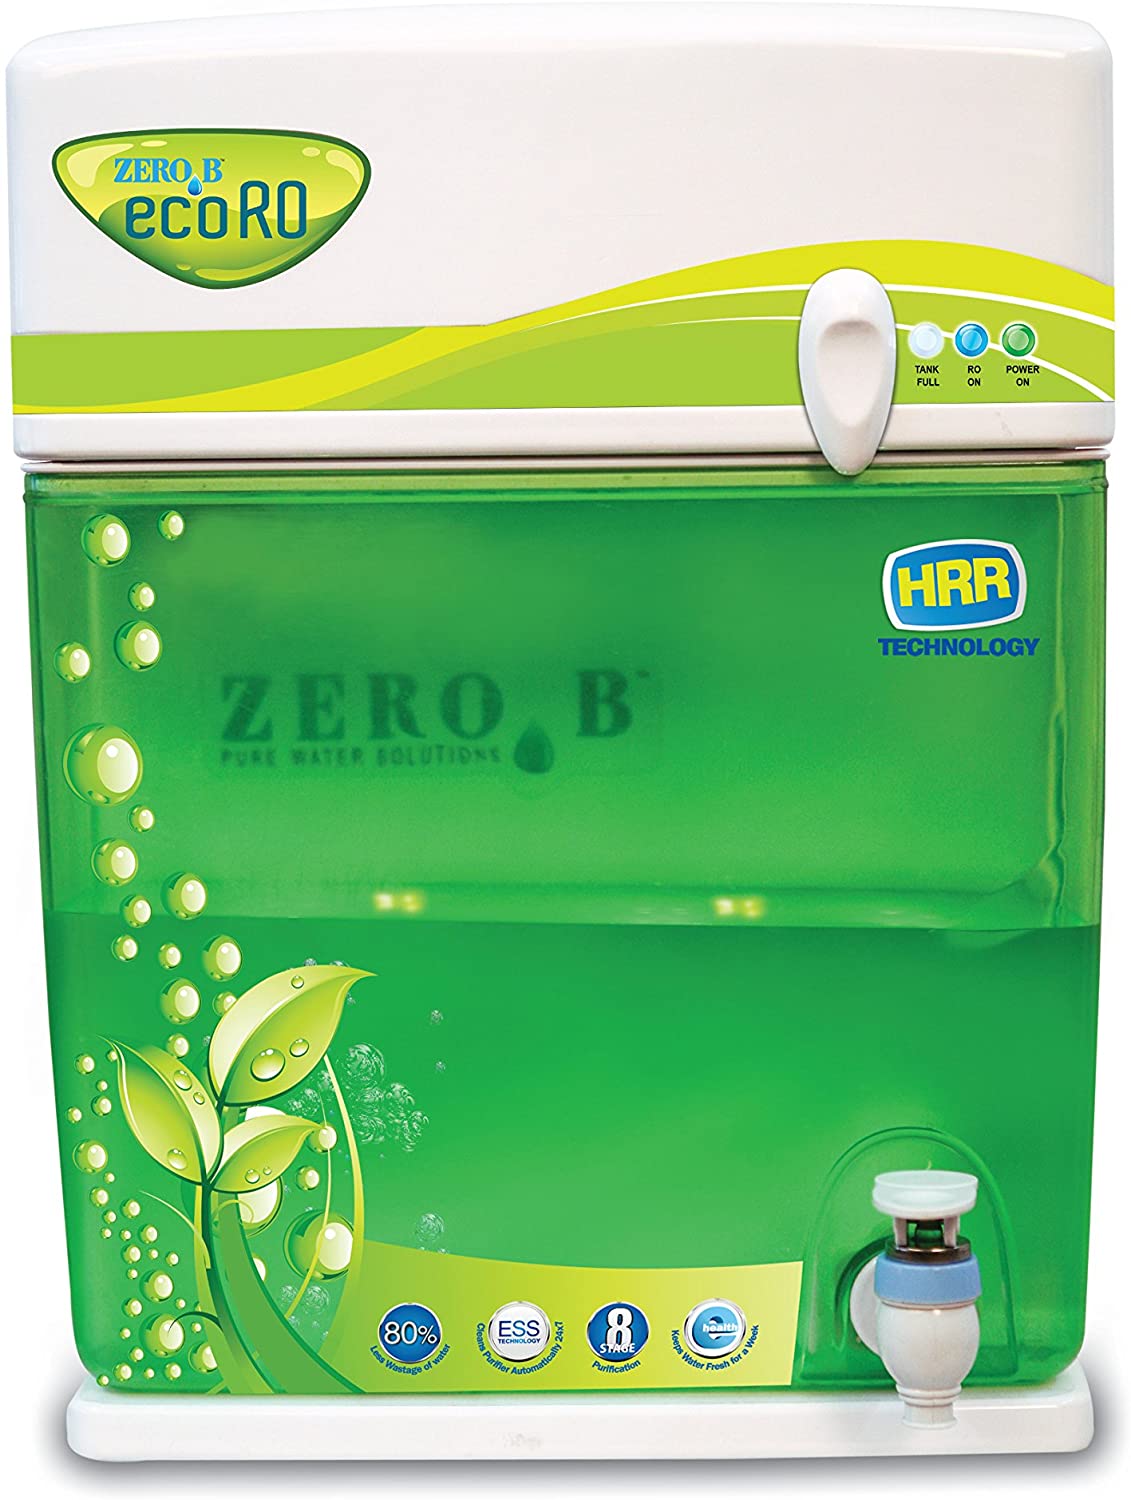 Buy ZeroB Suraksha Tap Water Purifier – Free Home Delivery